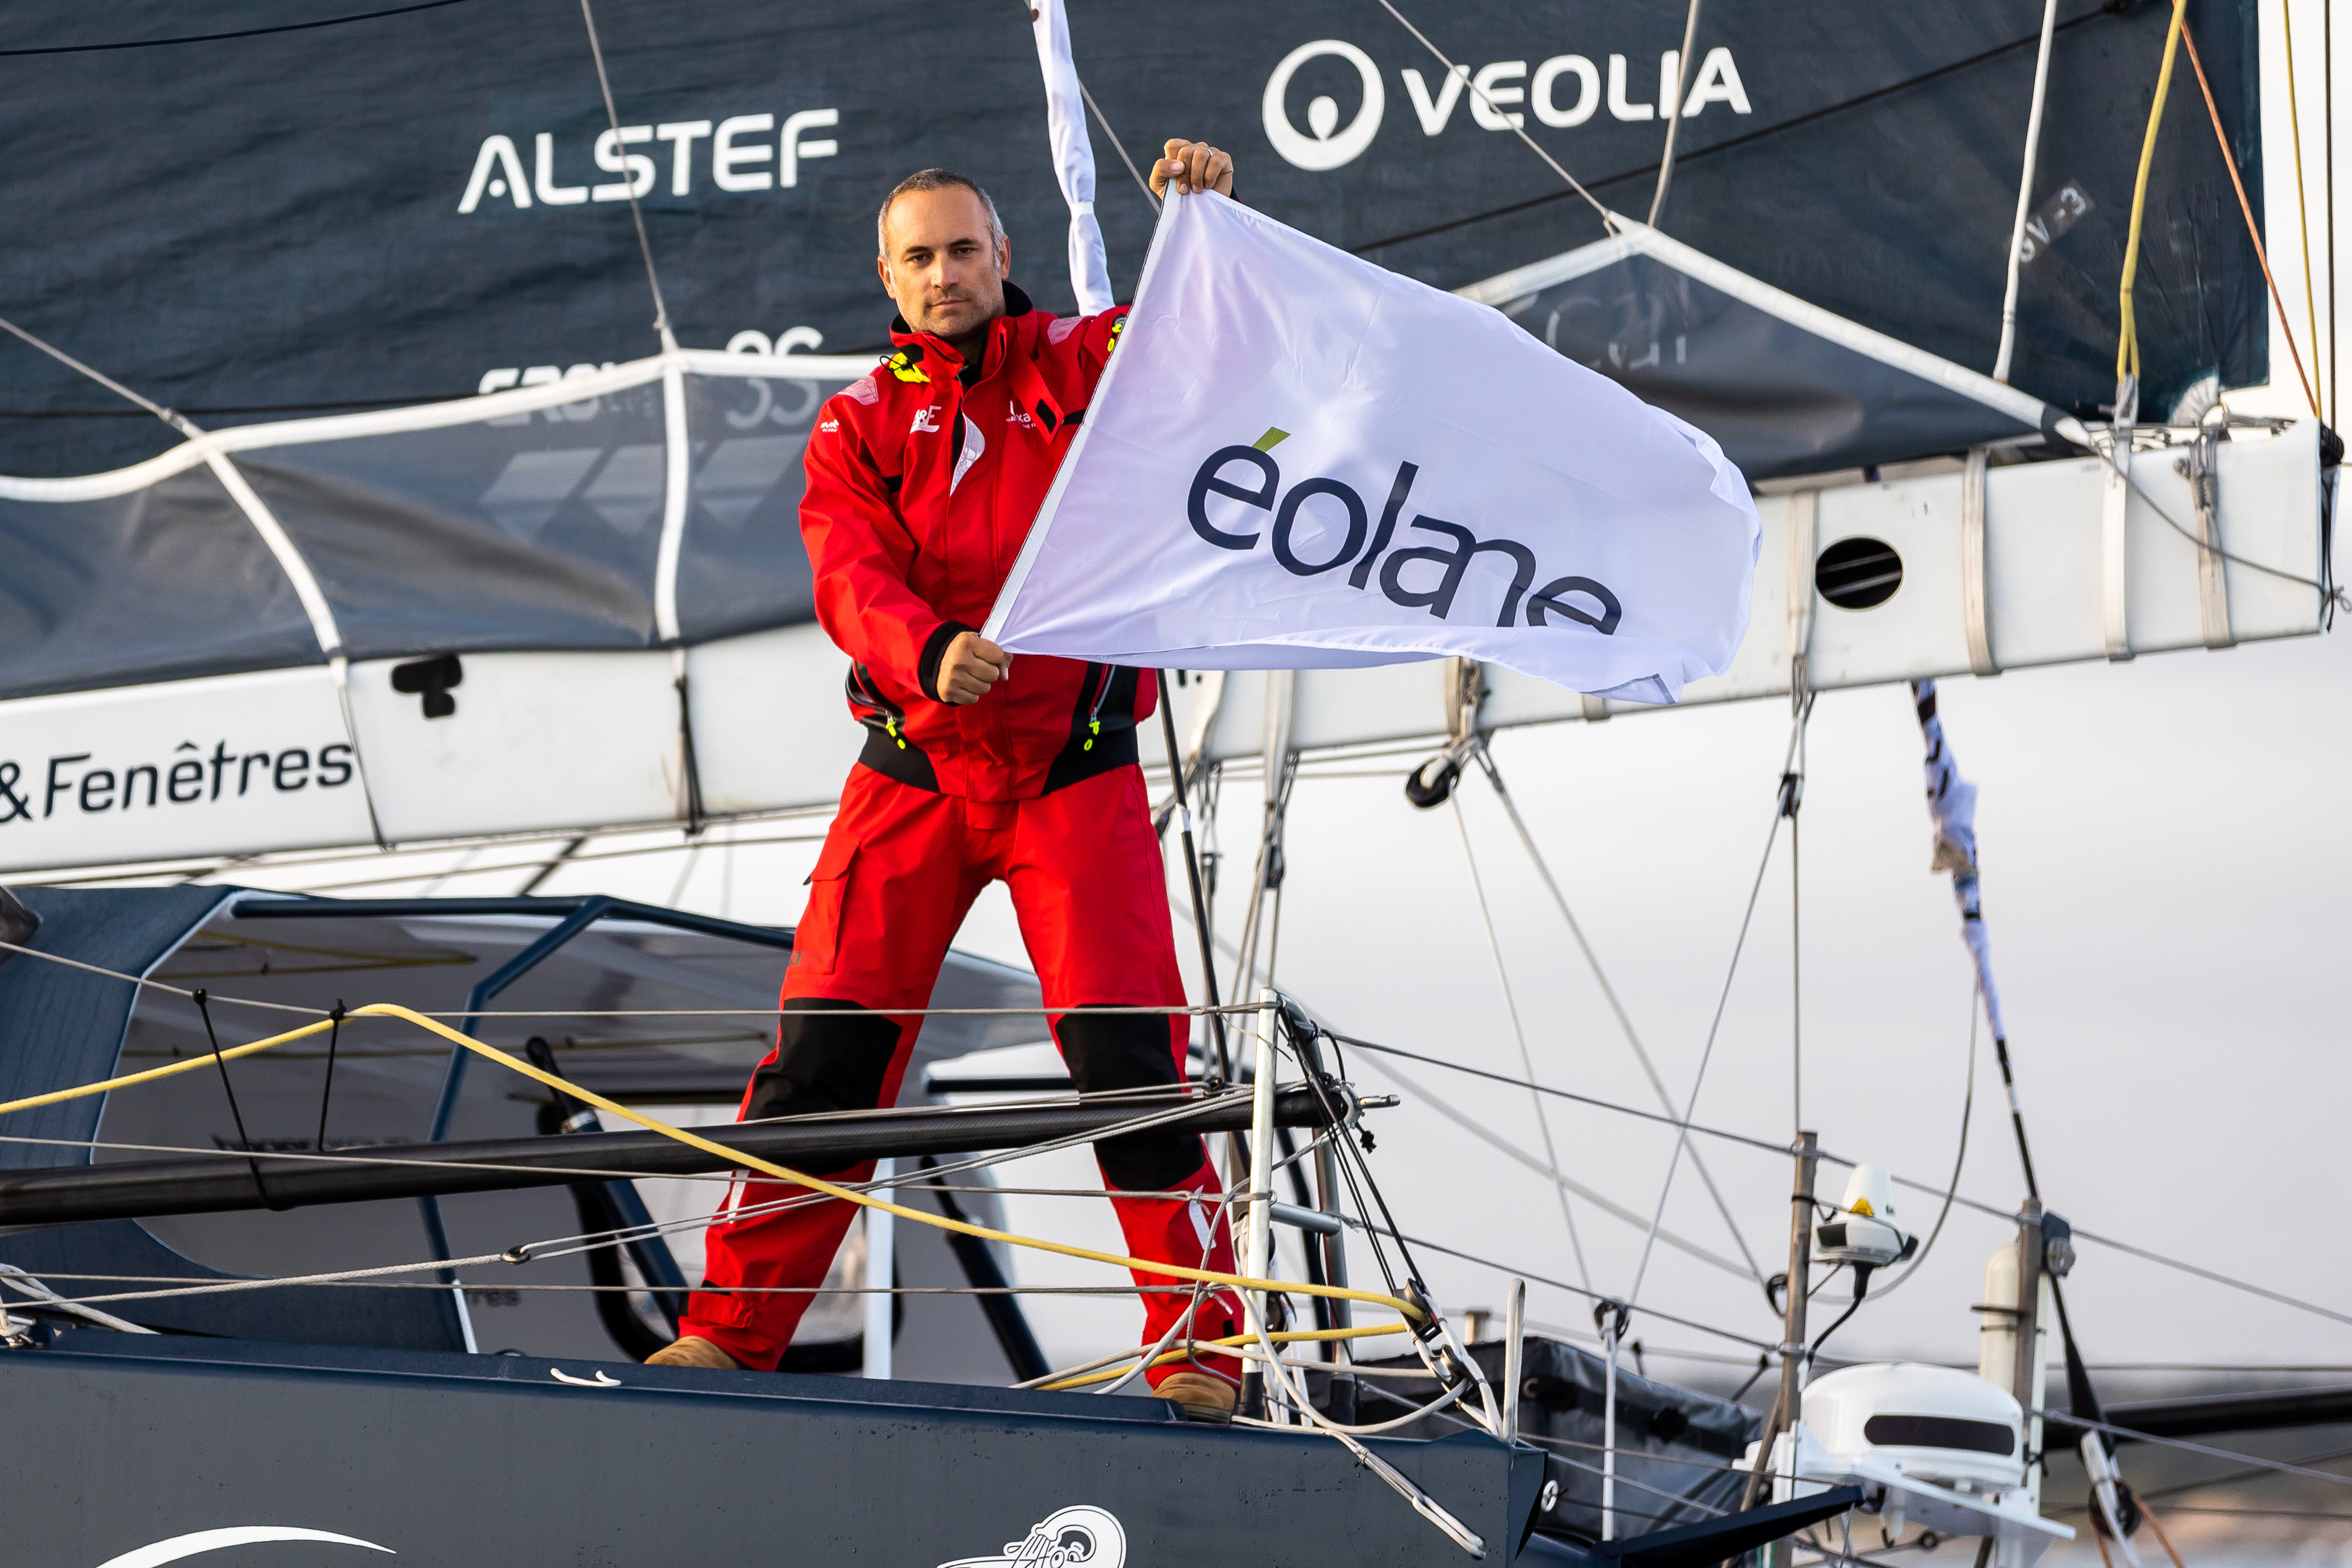 Picture of Fabrice Amedeo holding the éolane flag